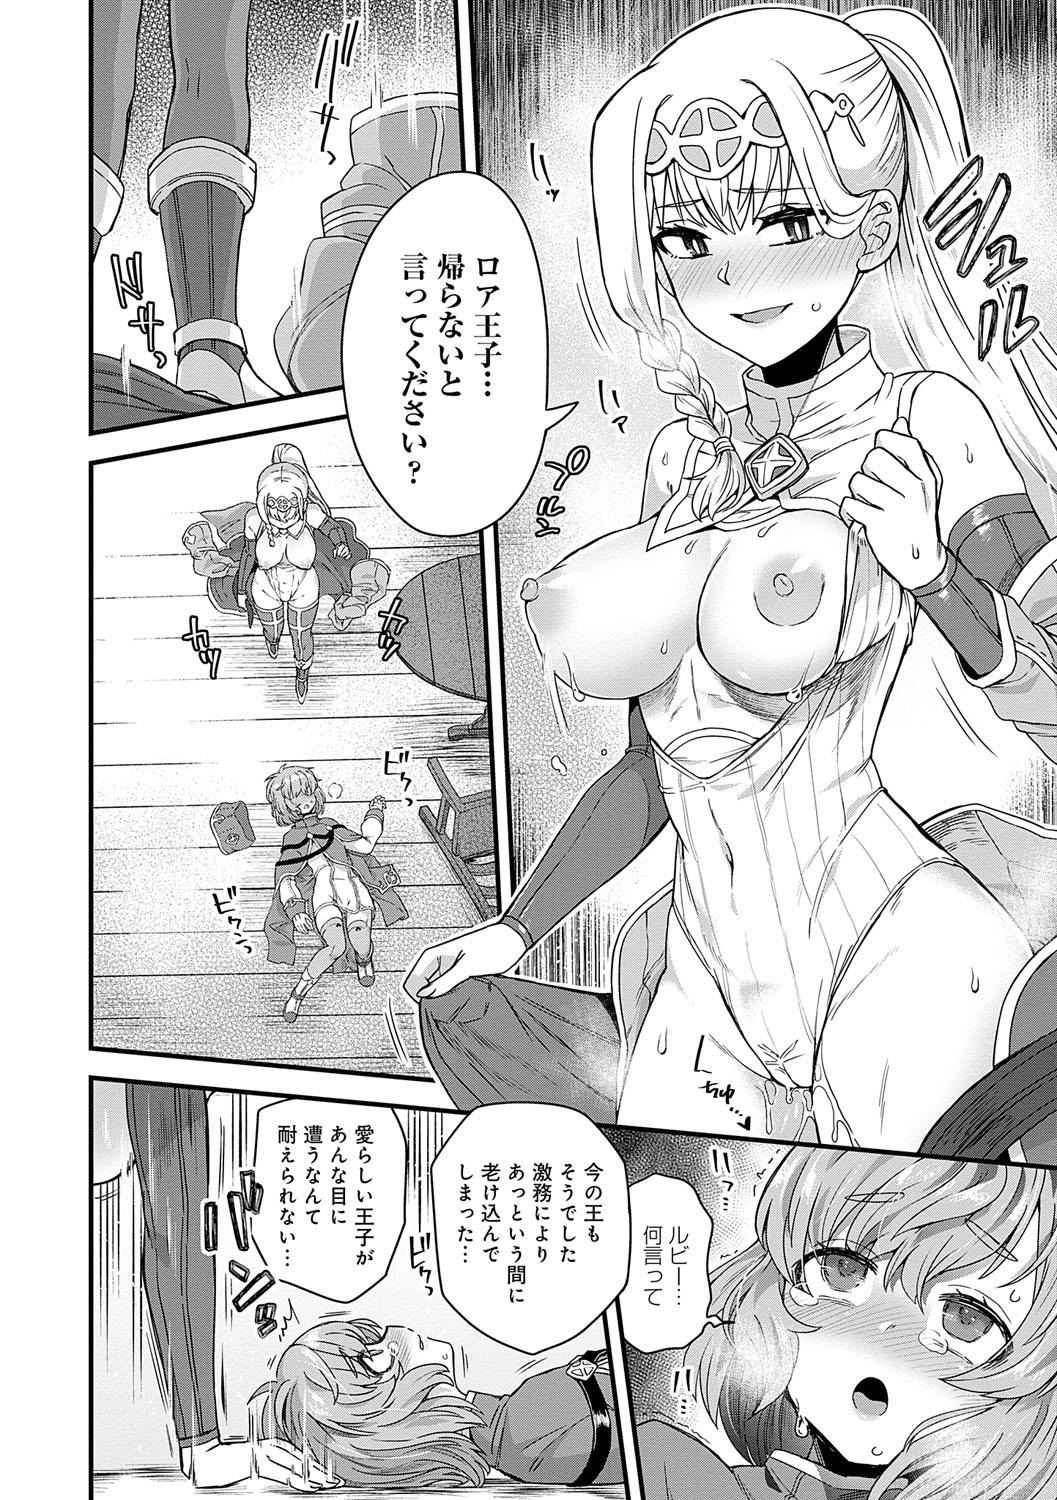 First Time Watashi to Issho ni... - With me... Reversecowgirl - Page 7